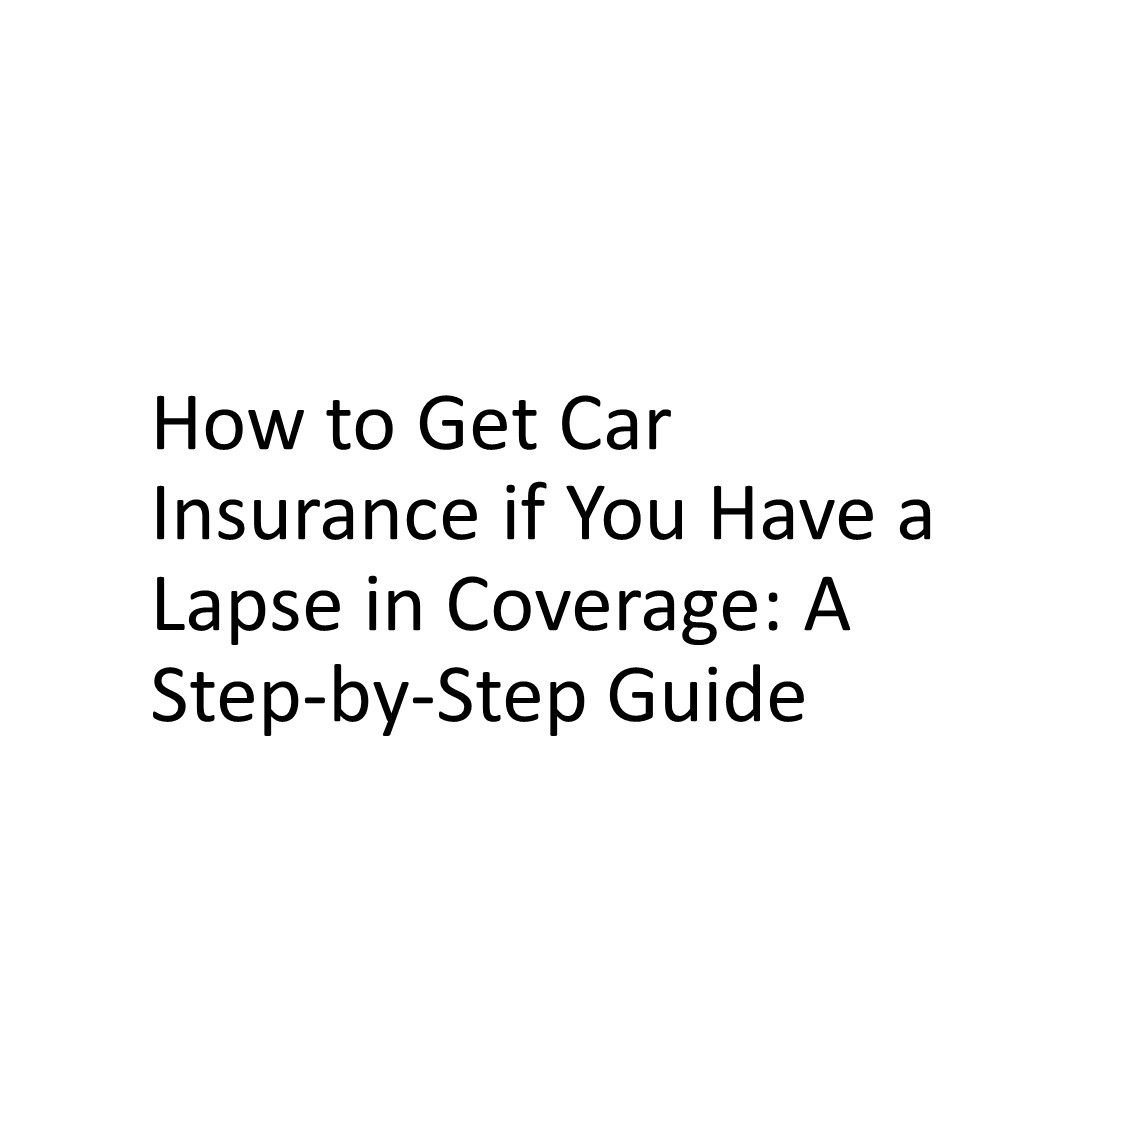 How to Get Car Insurance if You Have a Lapse in Coverage: A Step-by-Step Guide